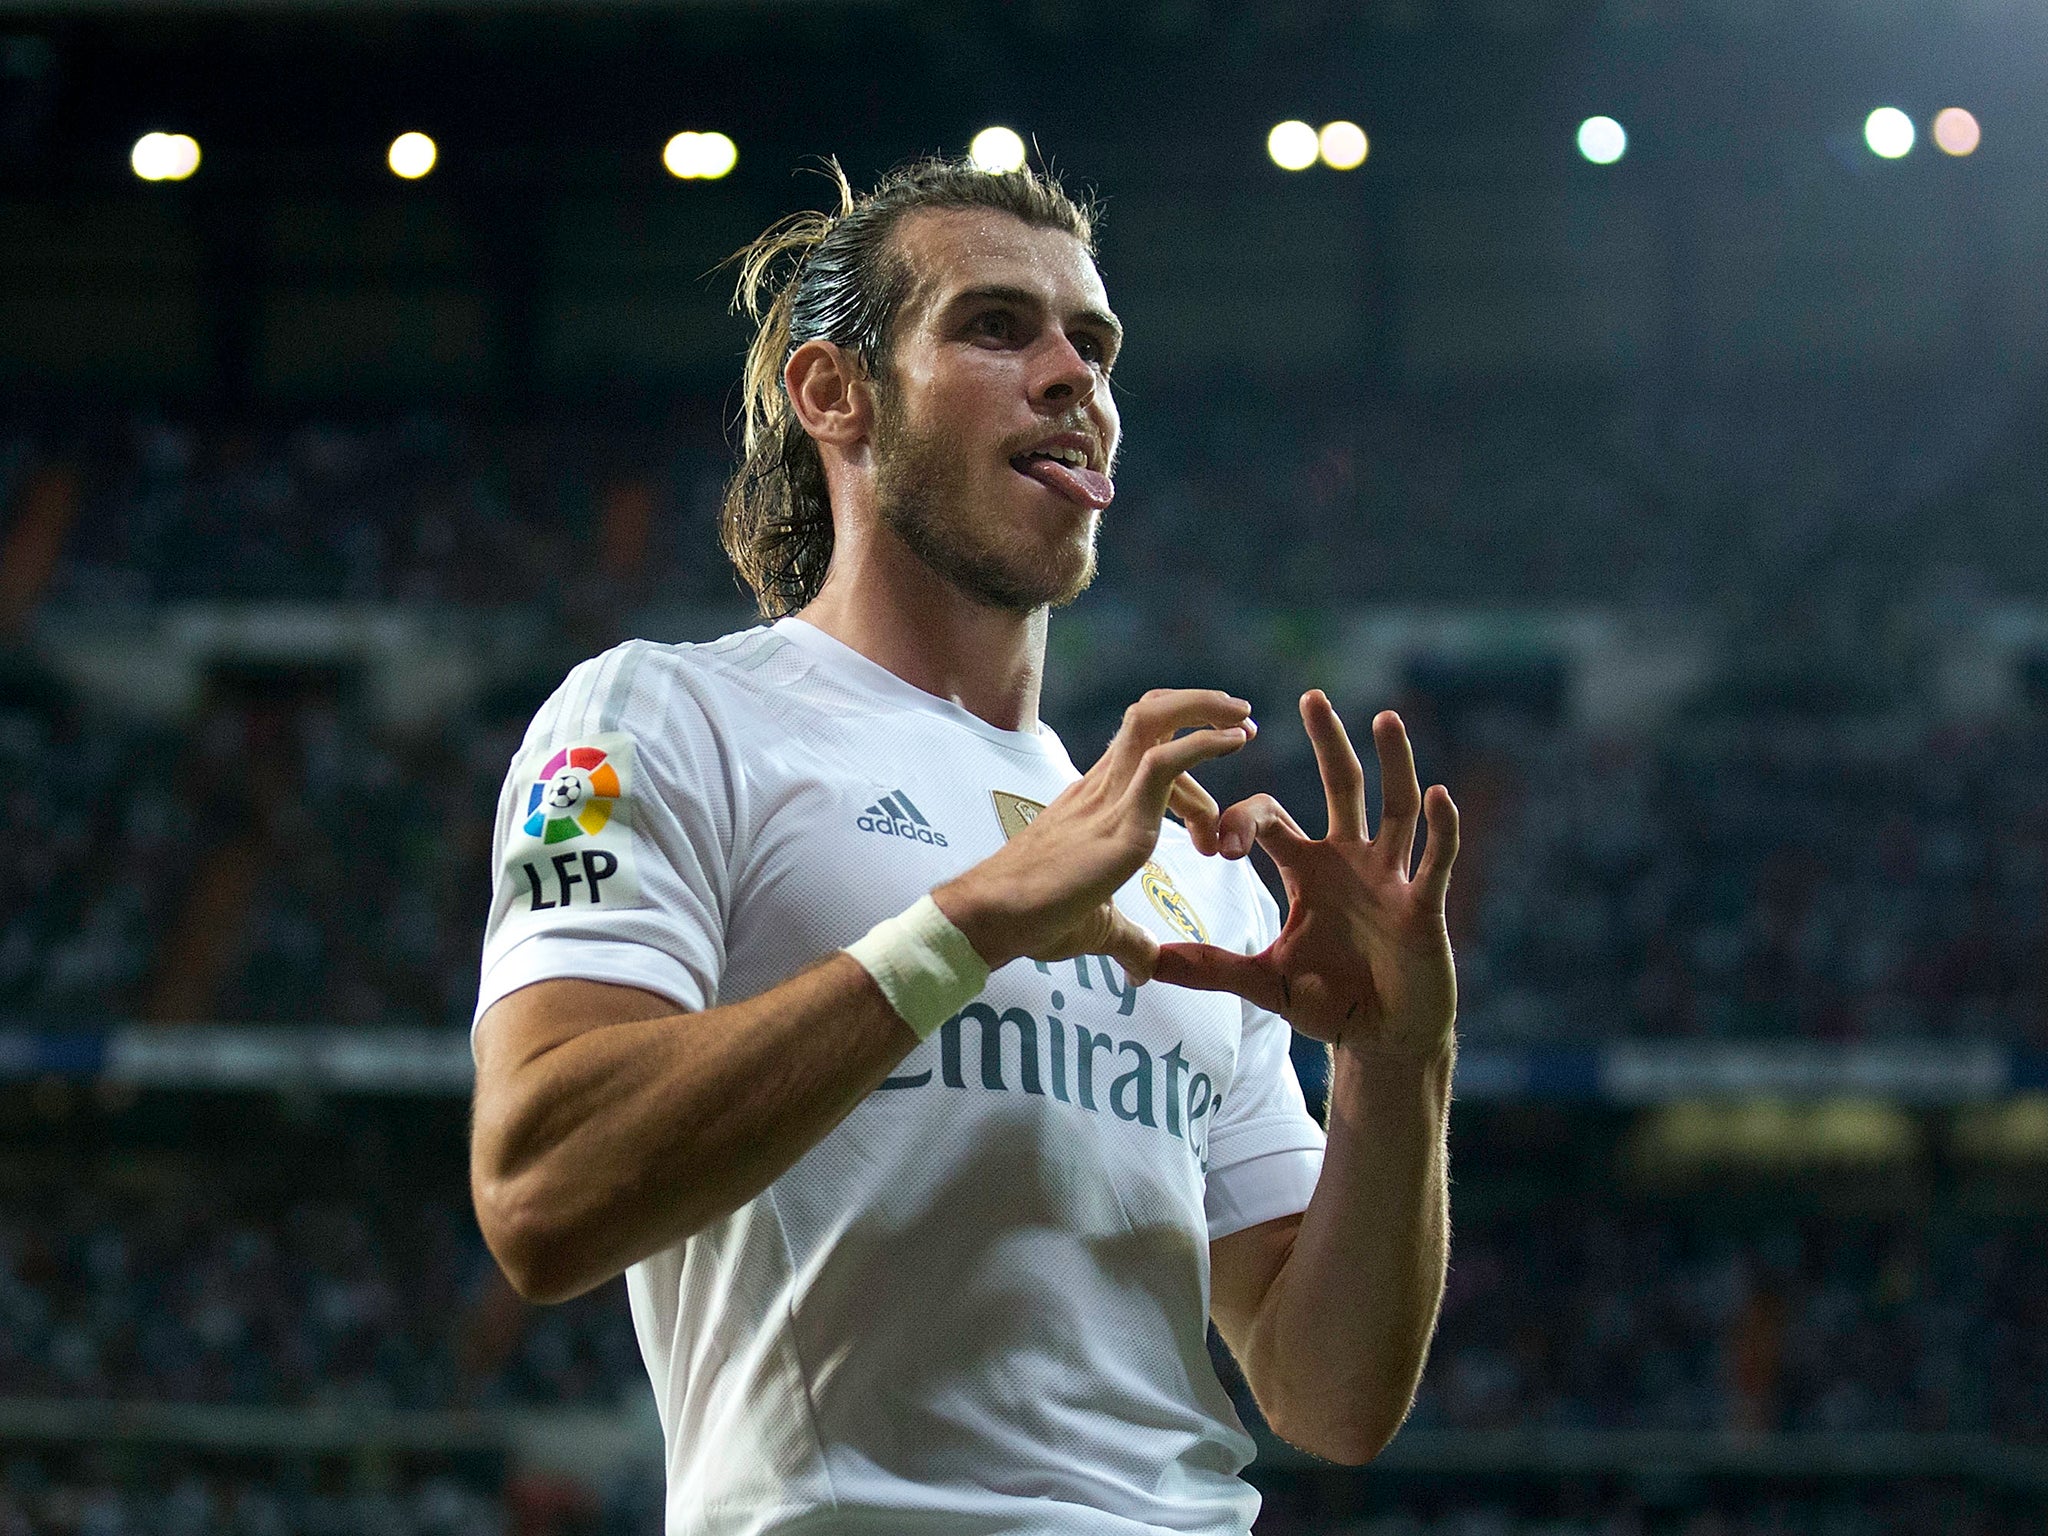 Speculation is rife that Gareth Bale could move to Manchester United